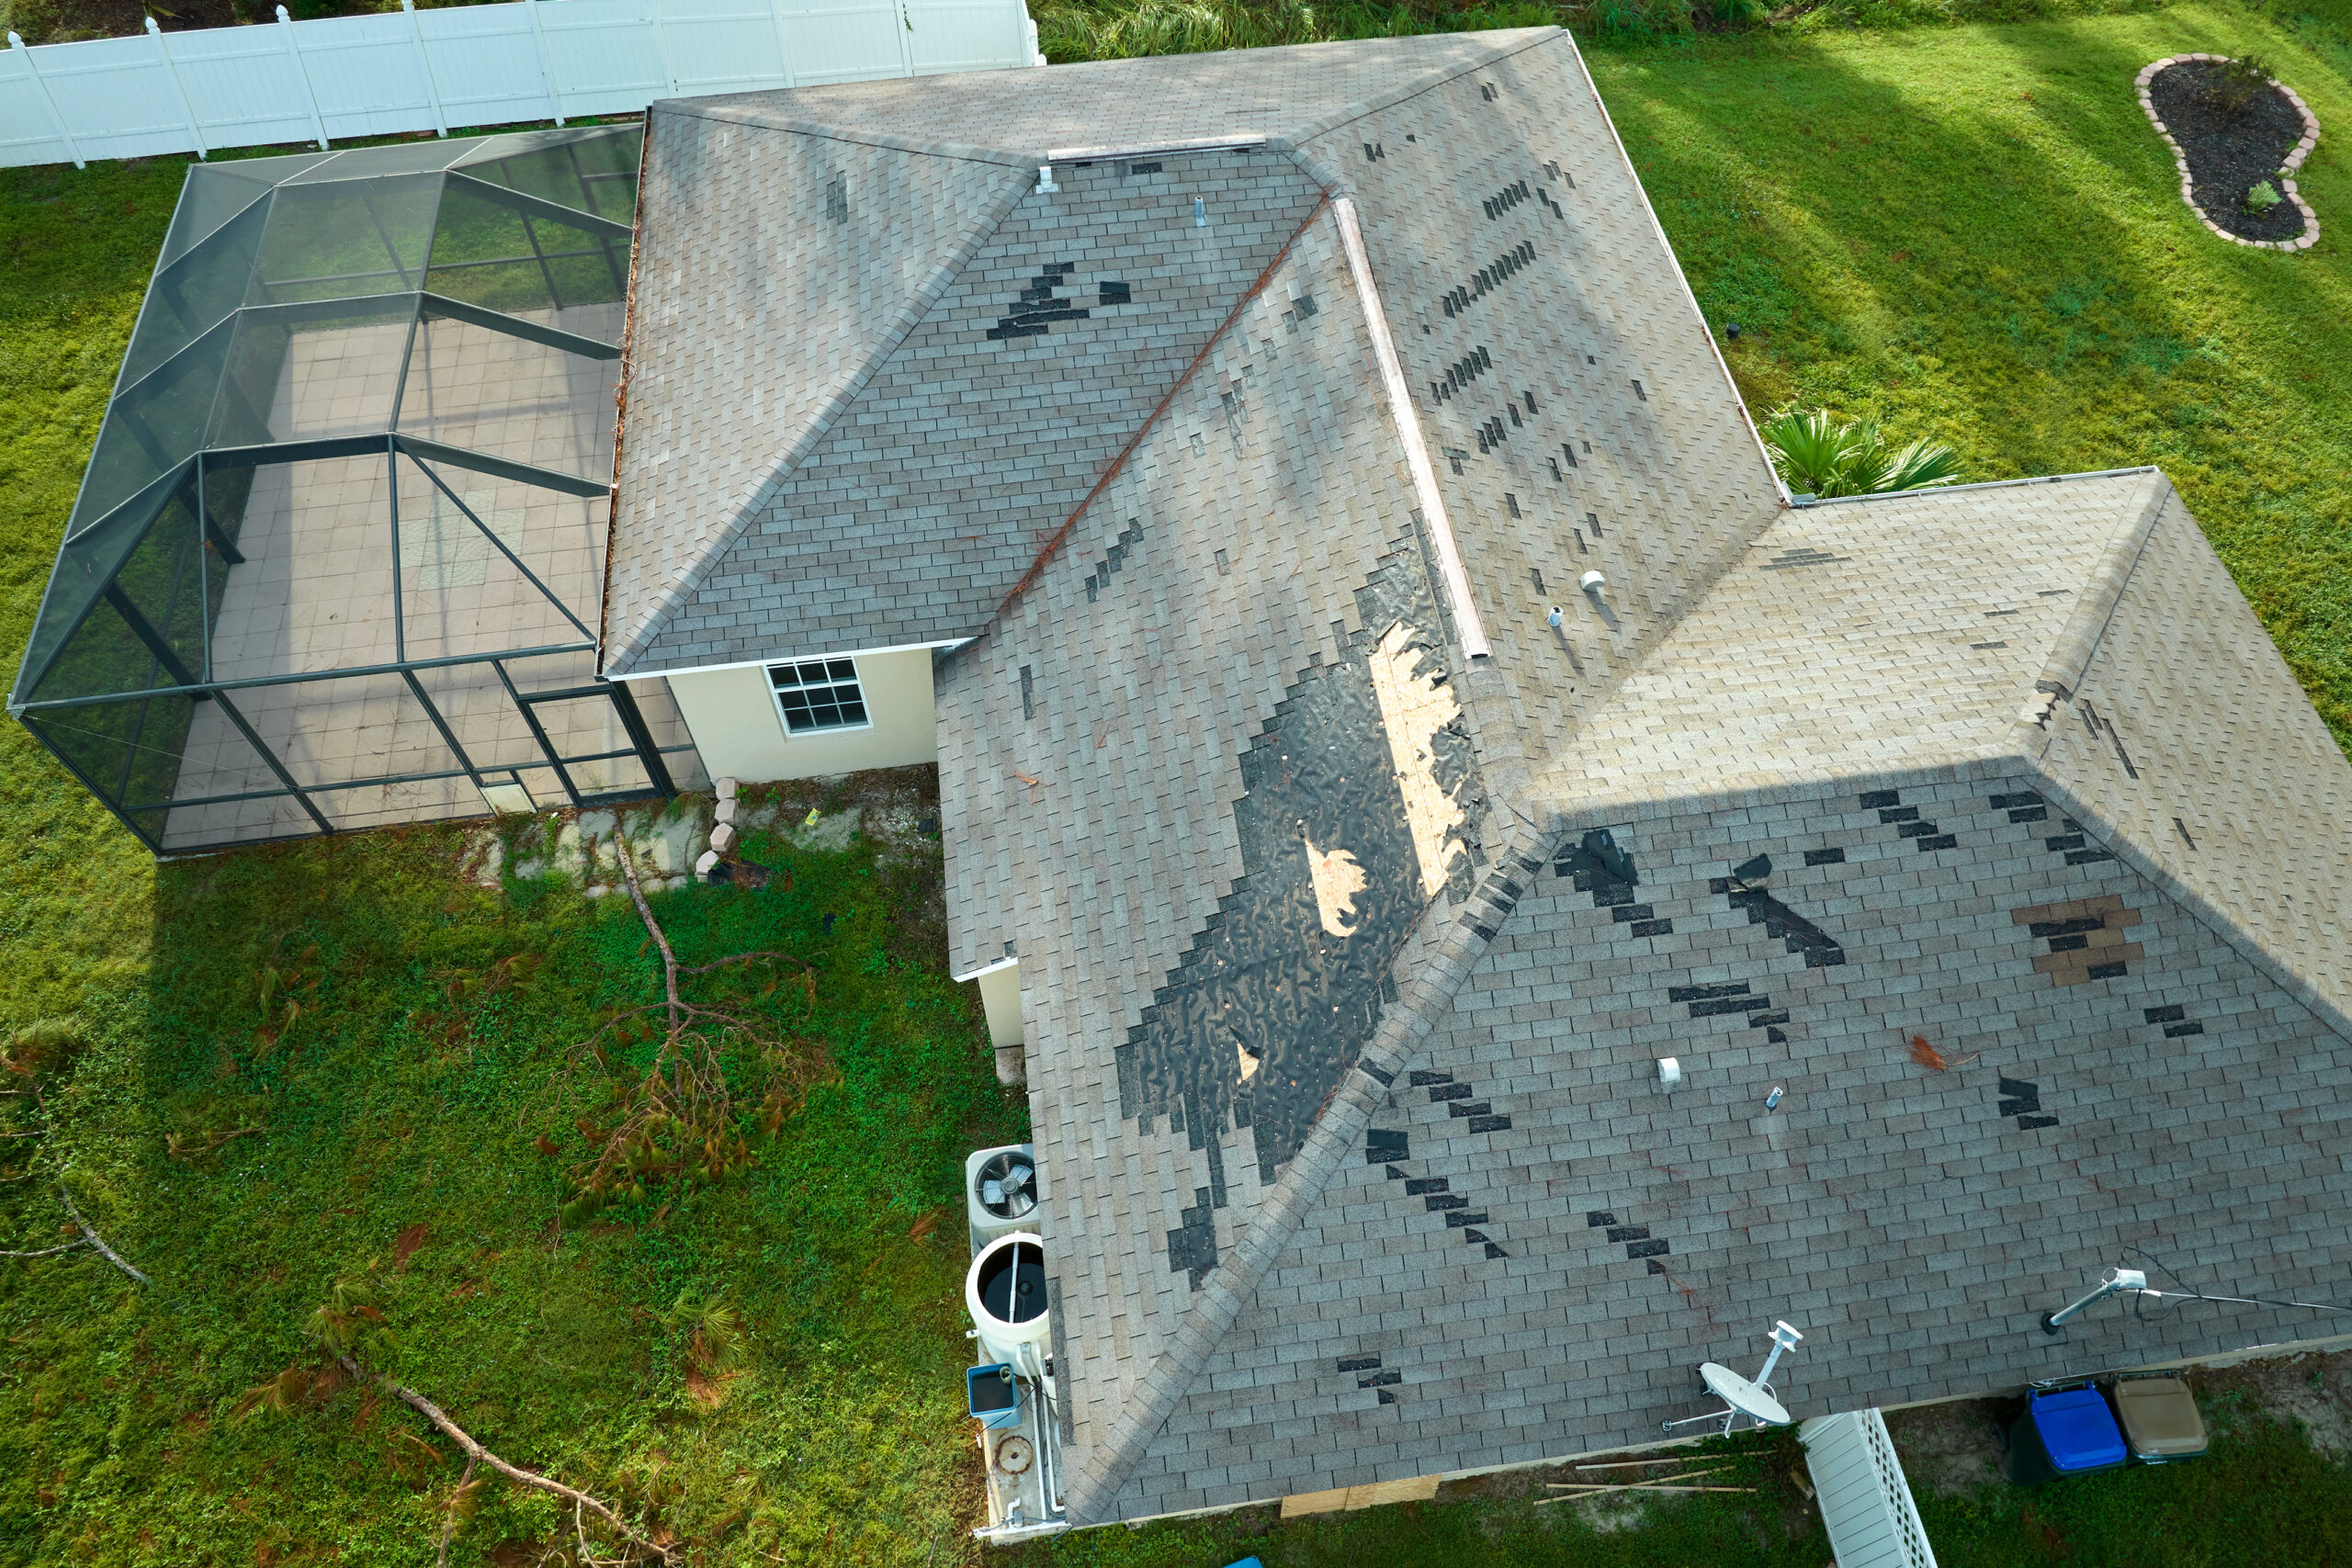 Wind damaged house roof with missing asphalt shingles after a natural disaster, hurricane.